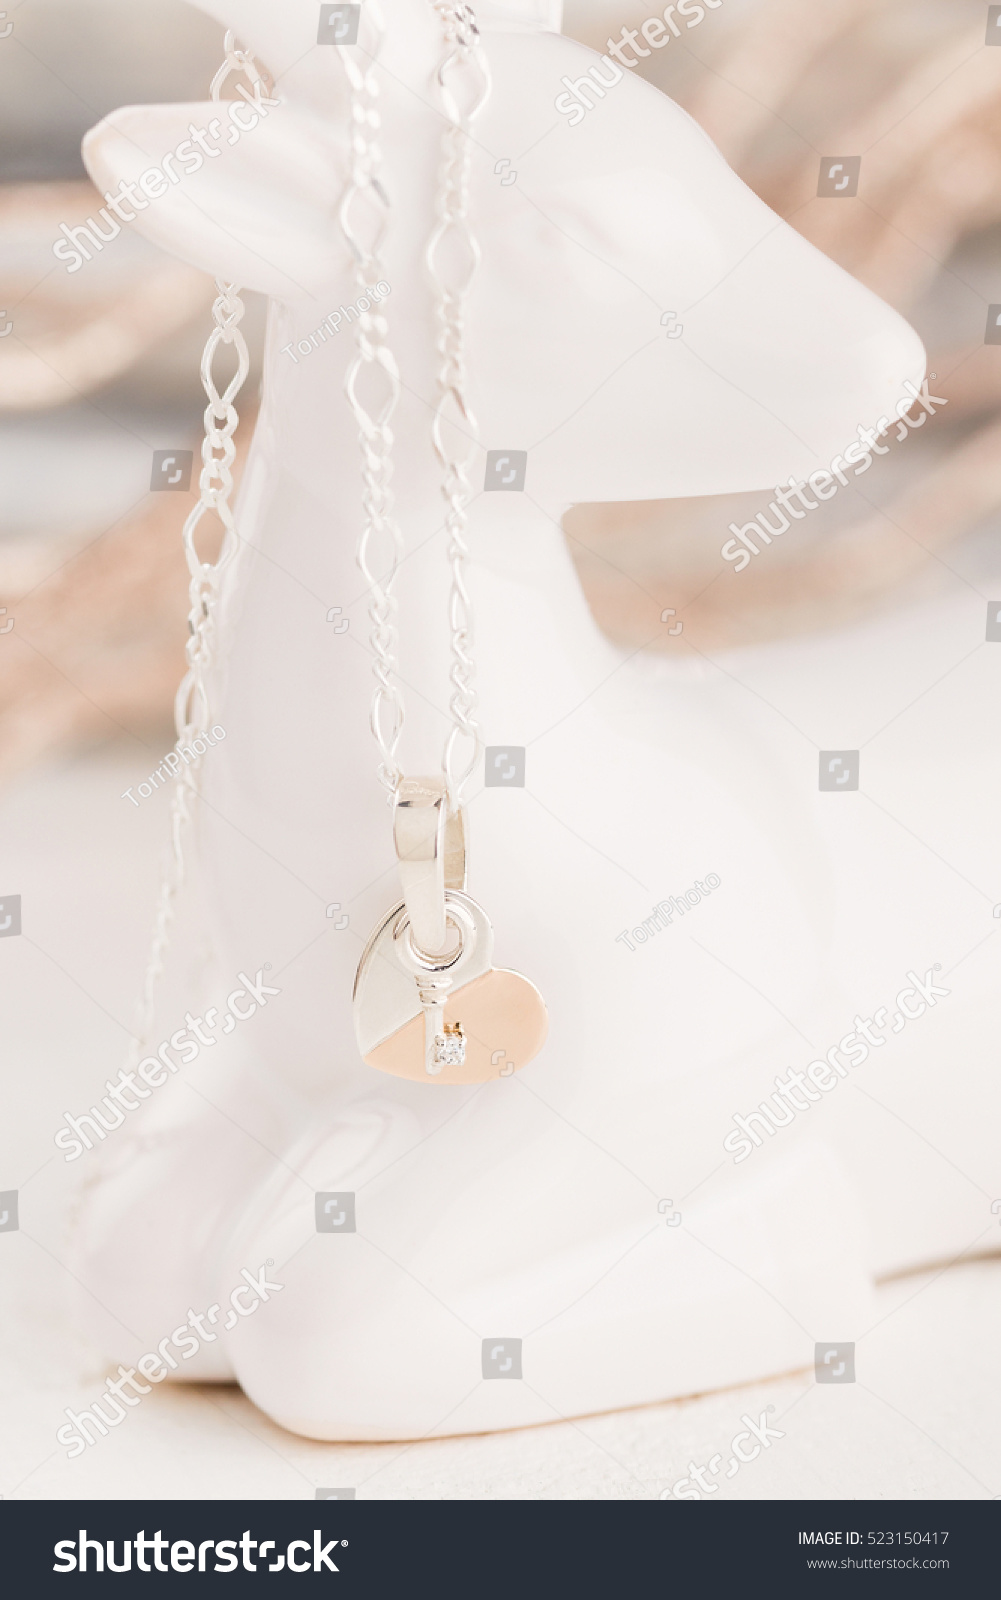 https://www.shutterstock.com/pic-523150417/stock-photo-silver-and-gold-heart-shaped-with-key-pendant-necklace.html